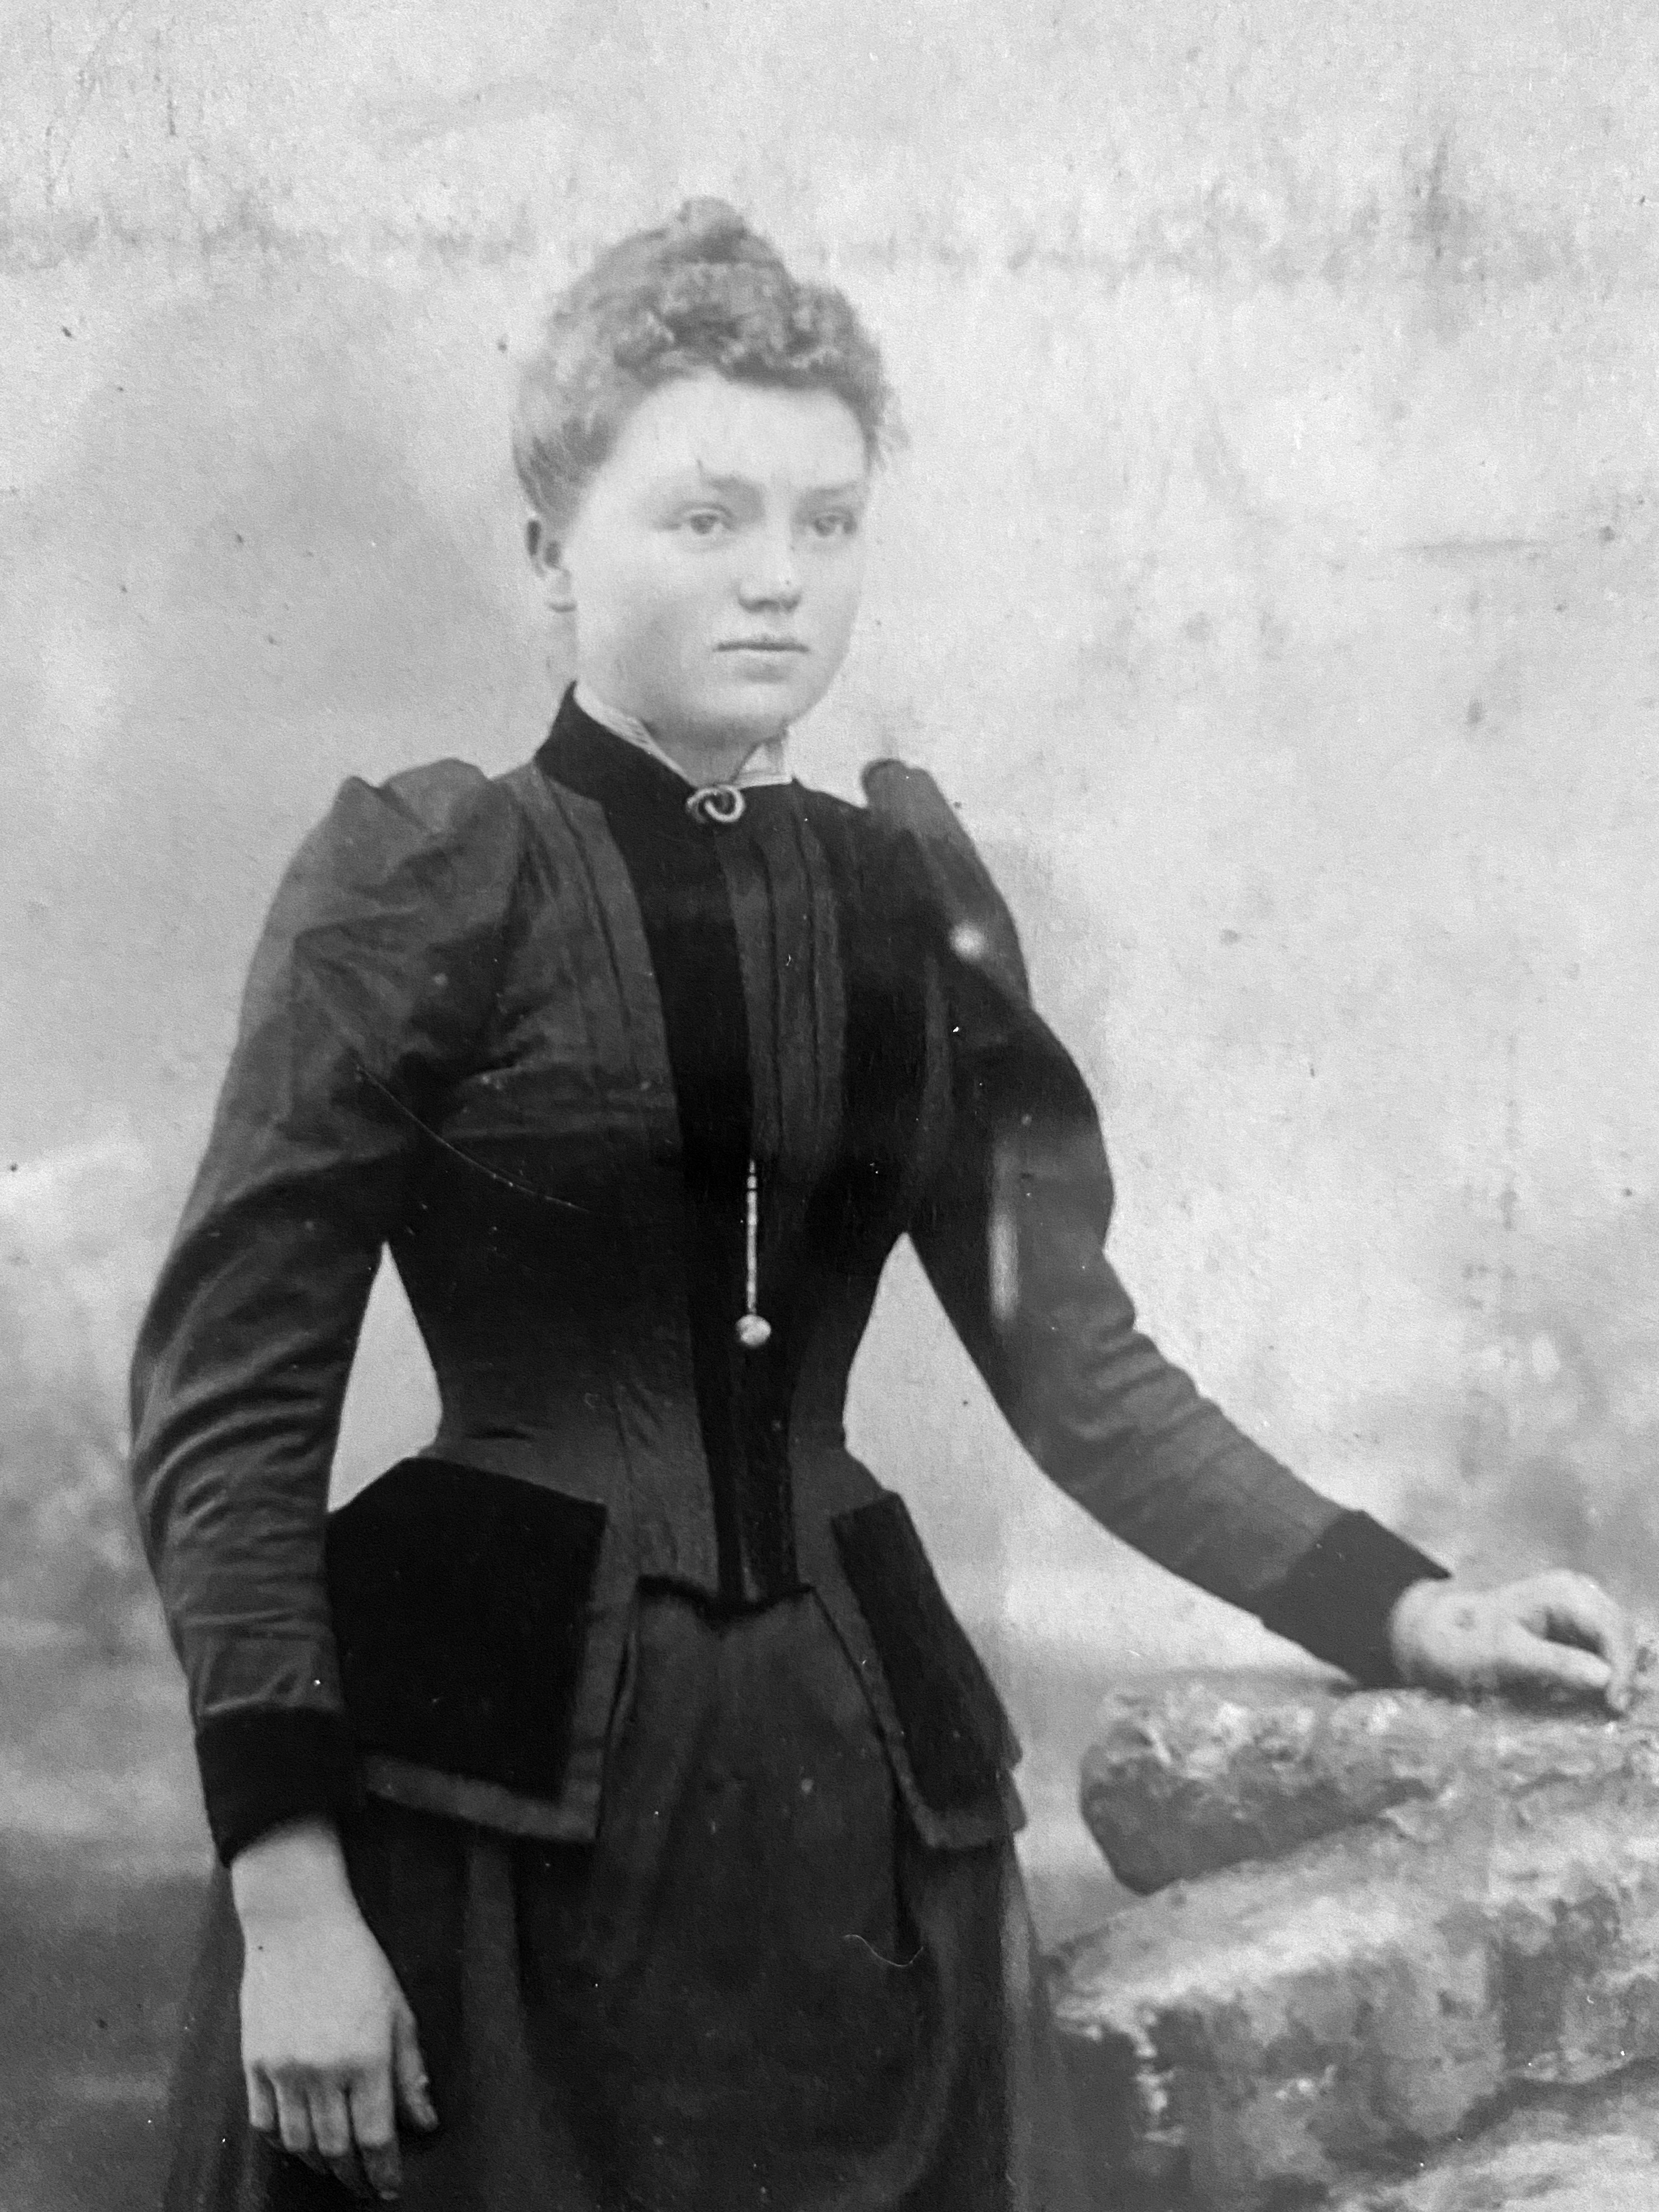 Anna Alminde in about 1892.